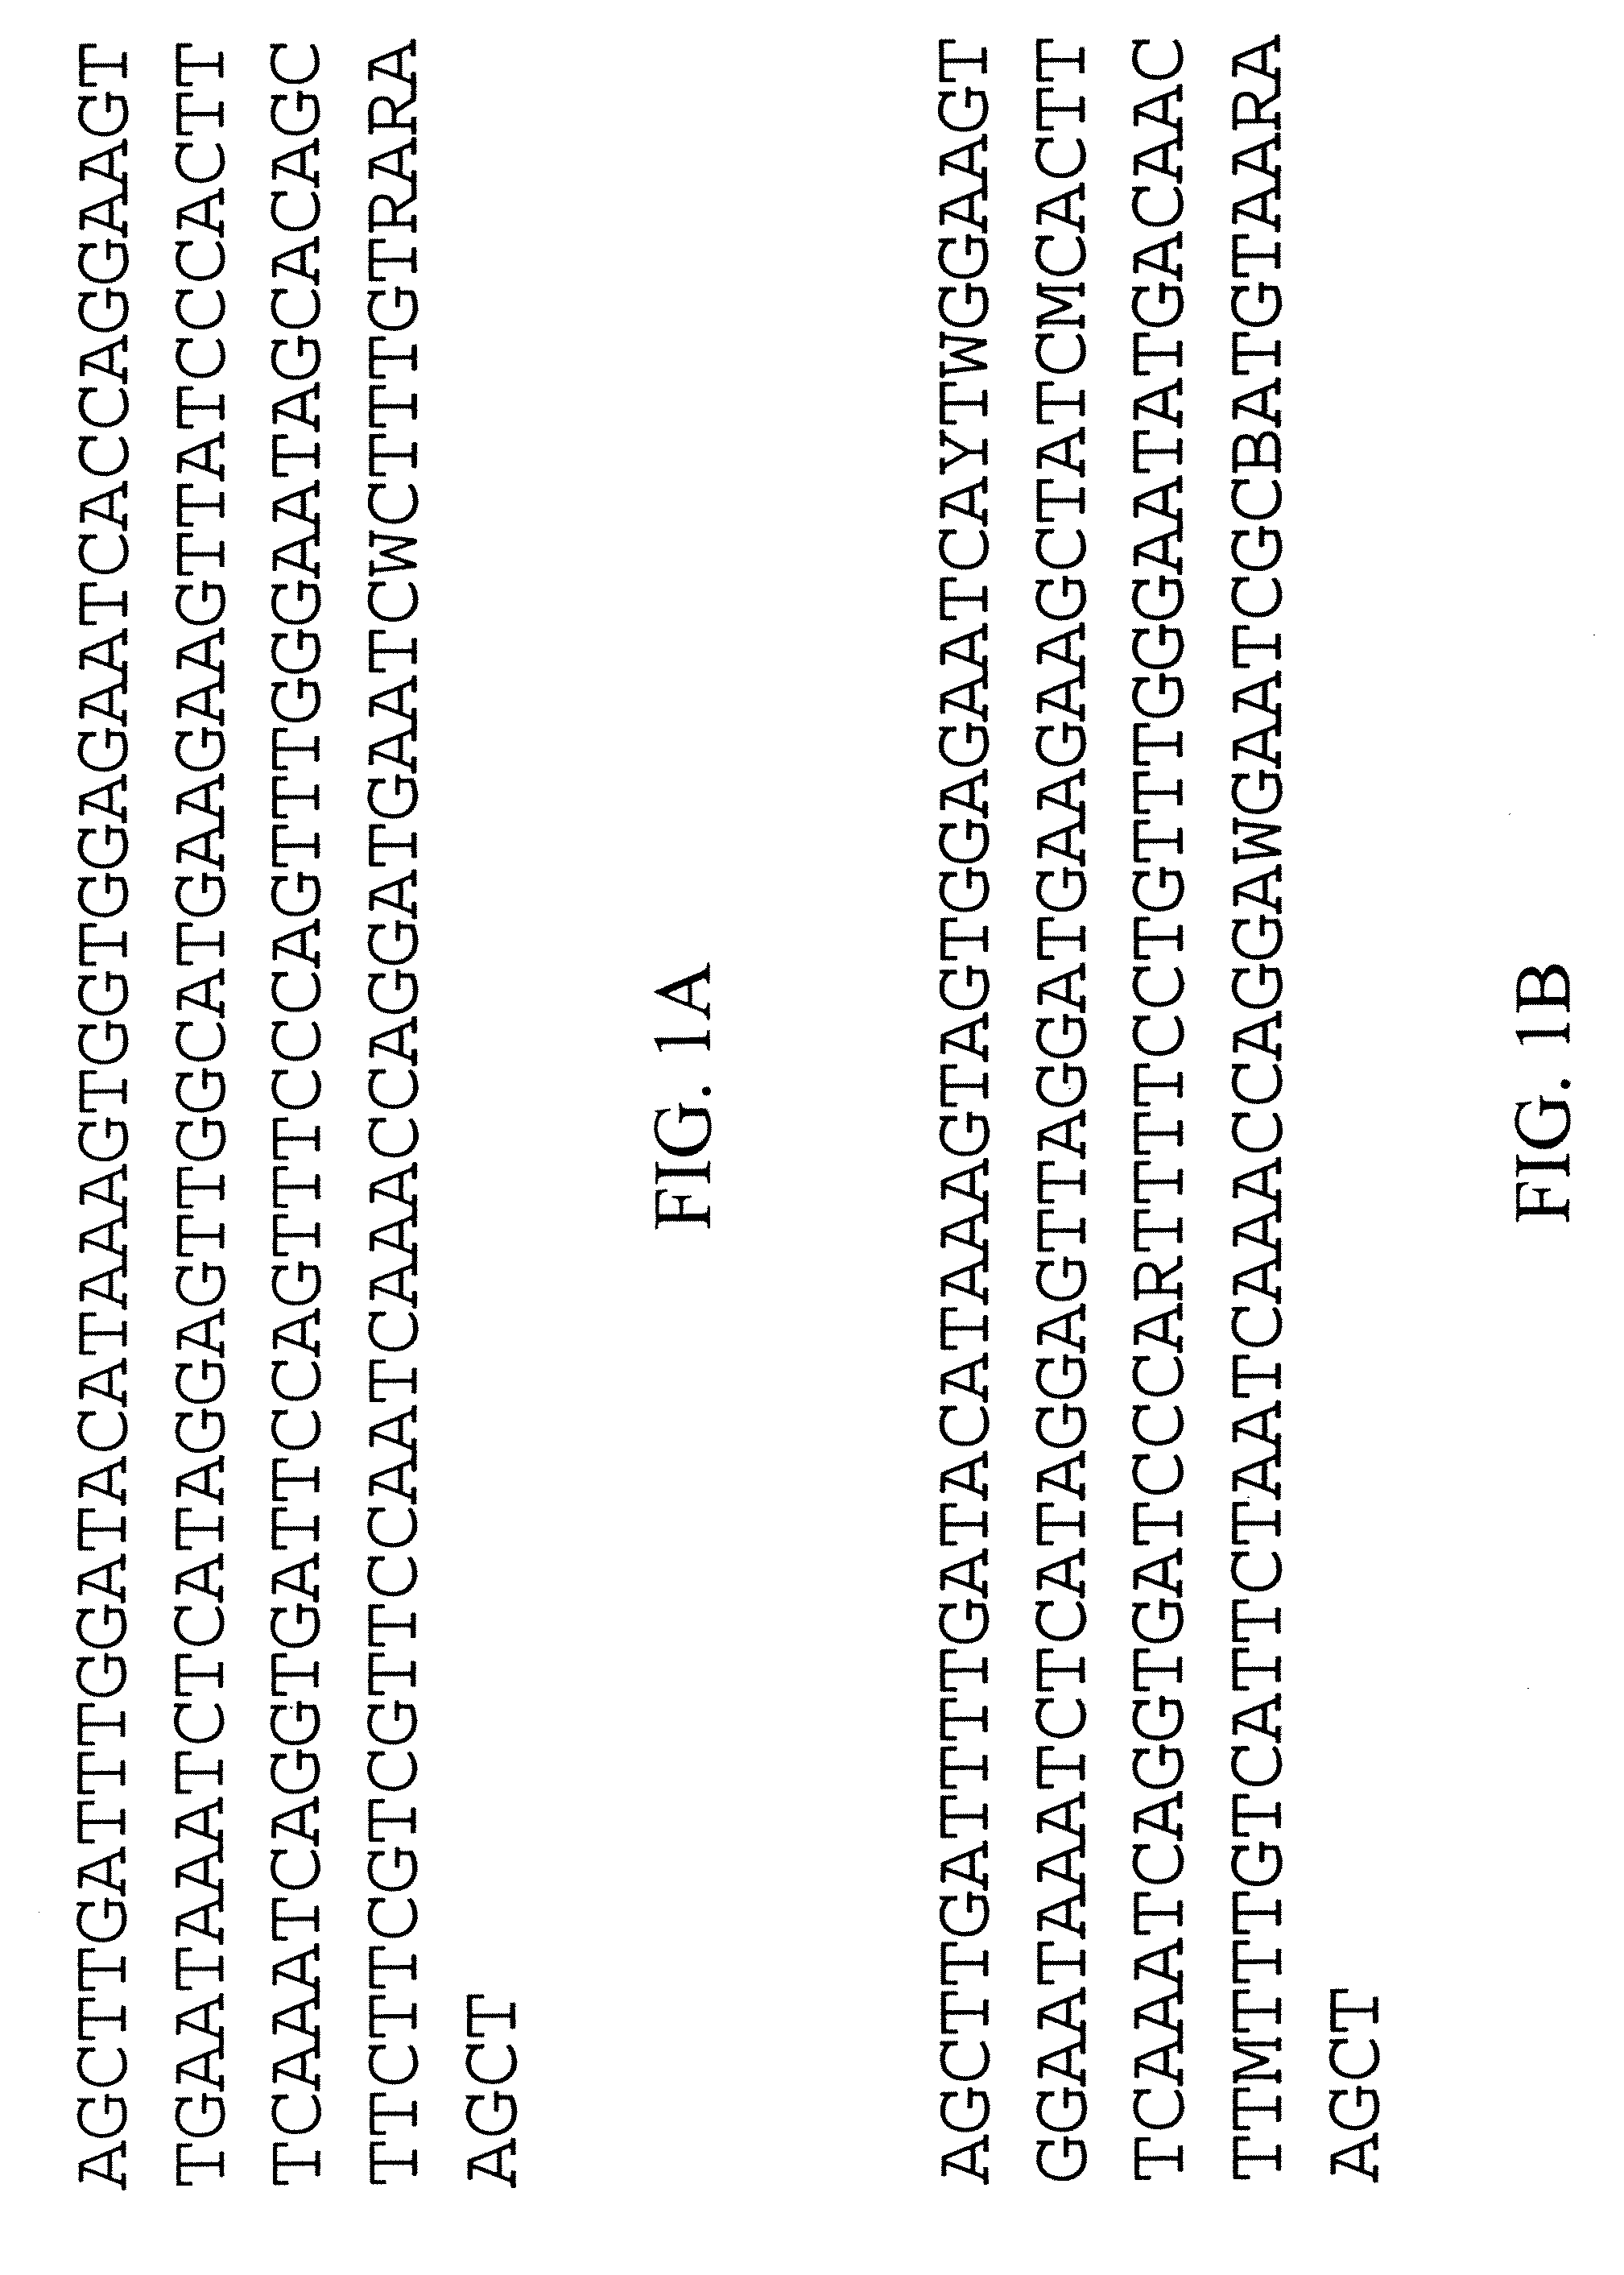 Methods for generation or increasing revenues from crops